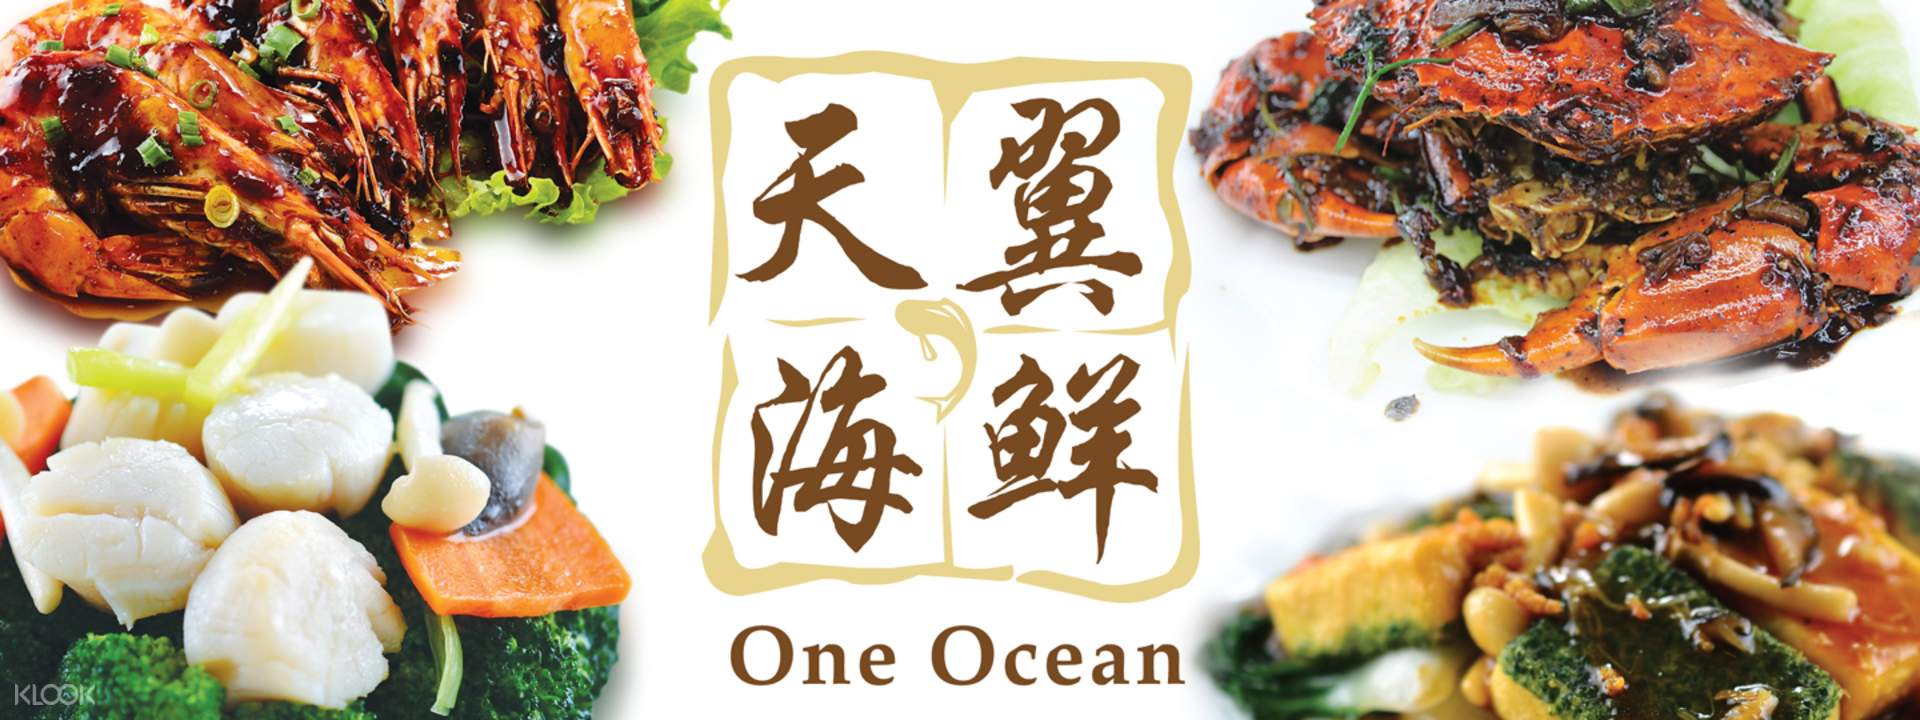 Up to 25 Off One Ocean Seafood in Mandai Klook Singapore